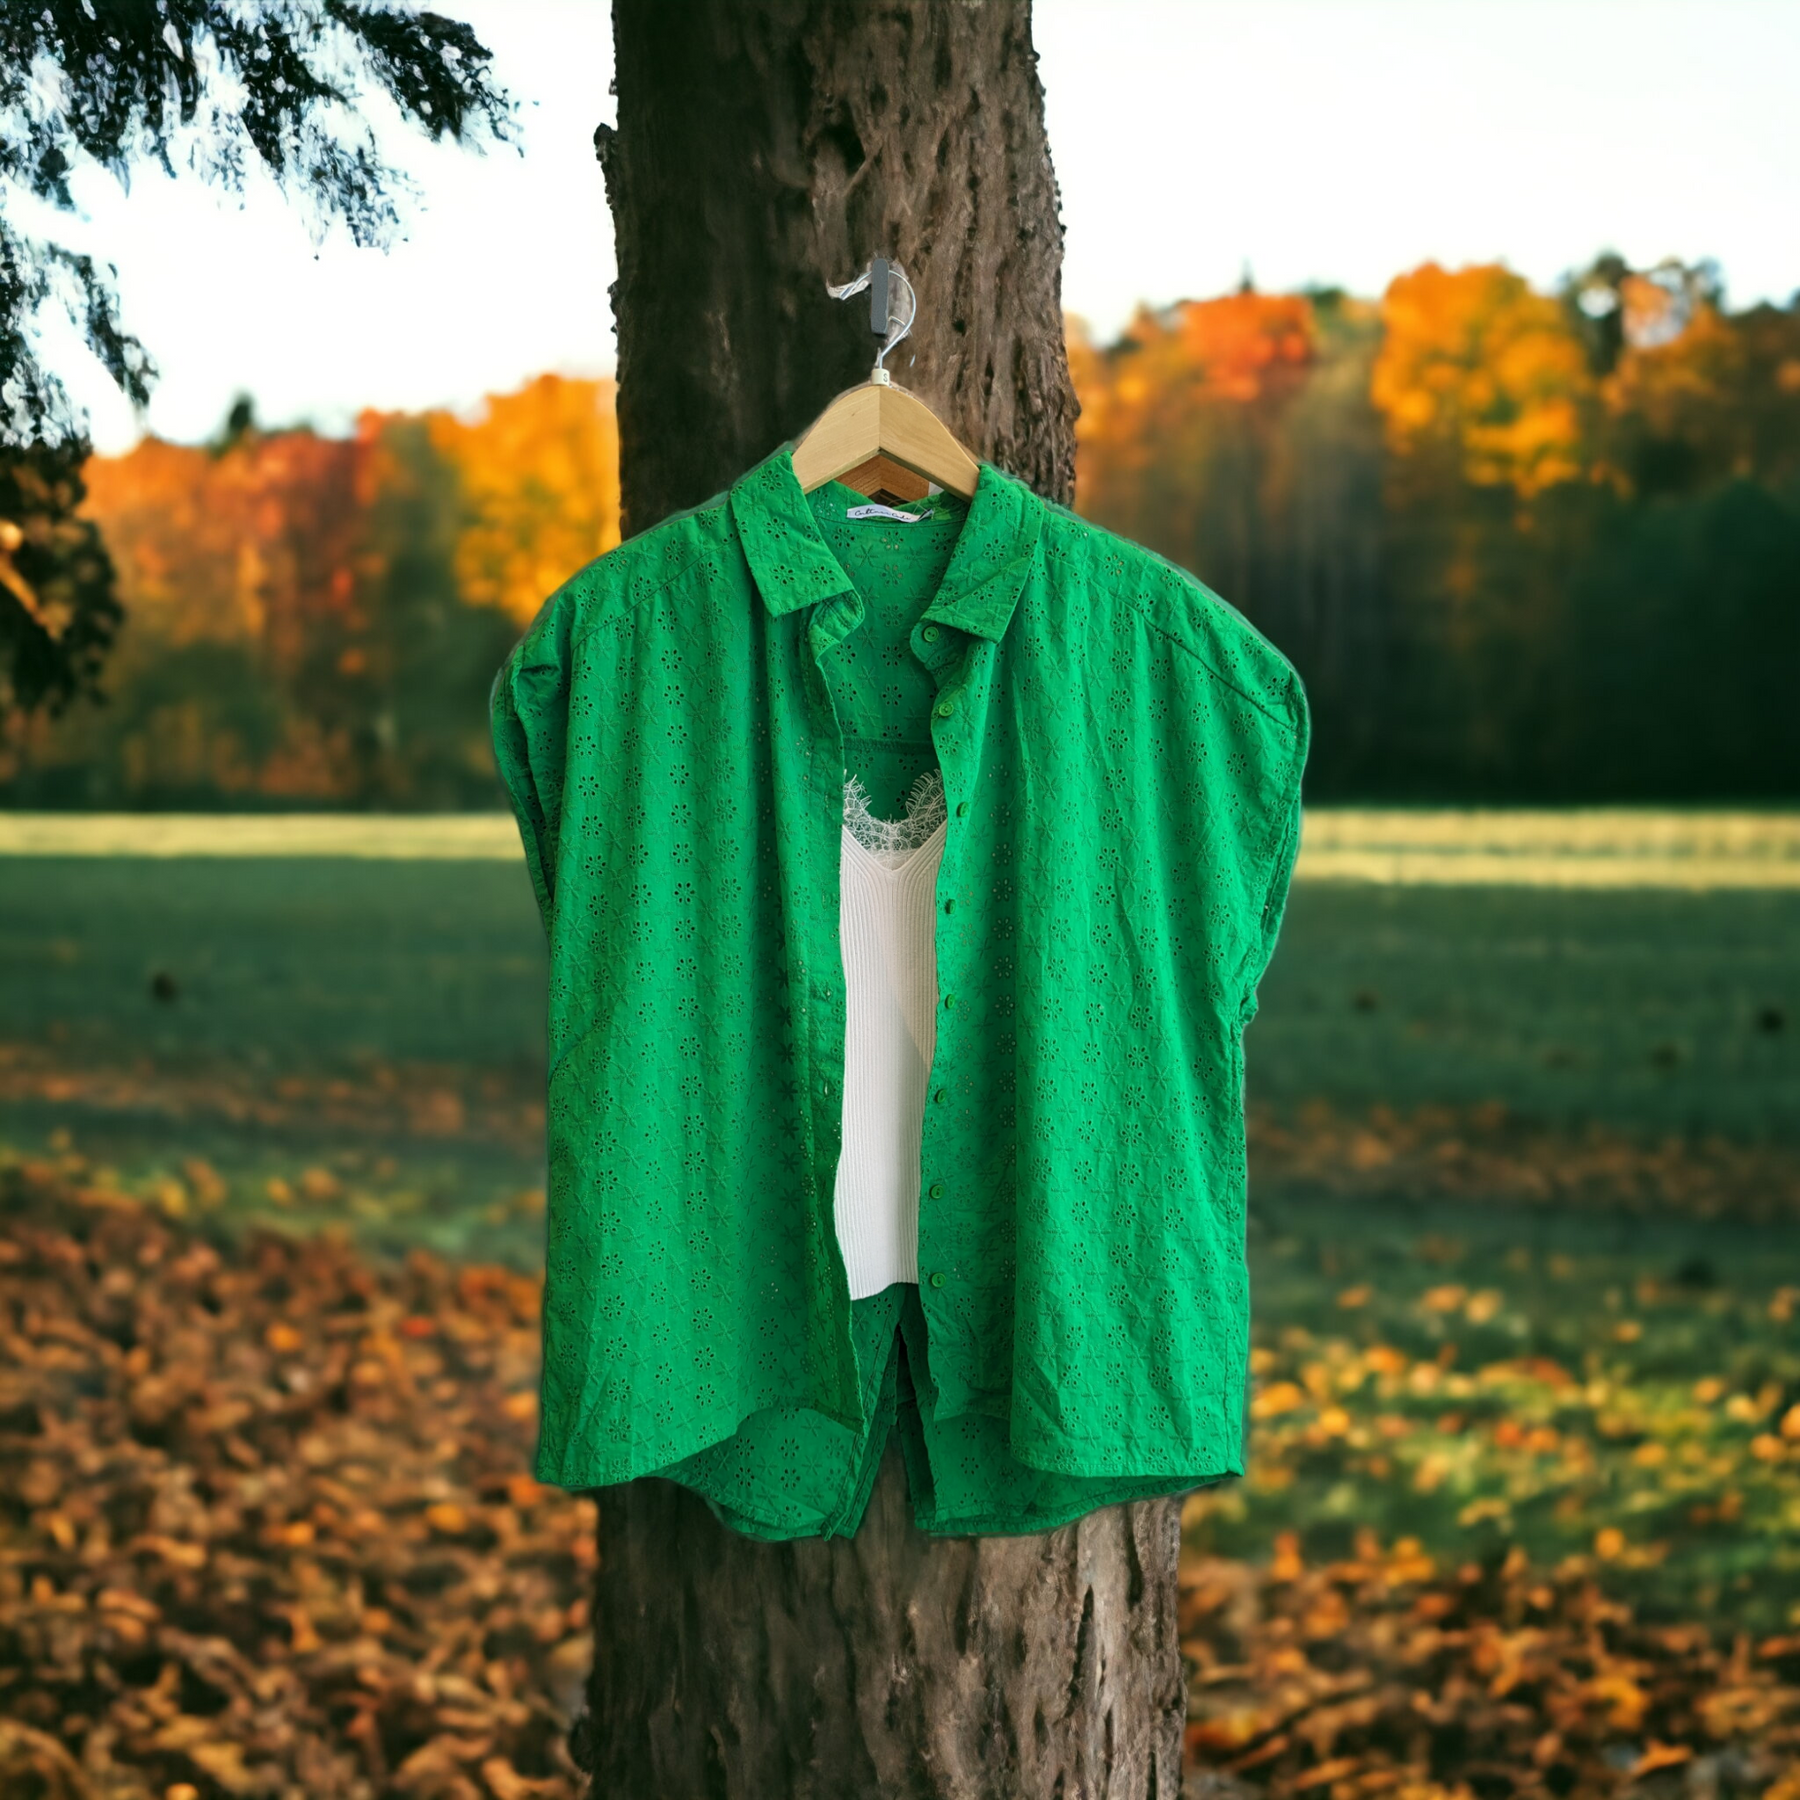 a green shirt layered over a white tank hangs from a tree in a fall scene. why? because we like it lol